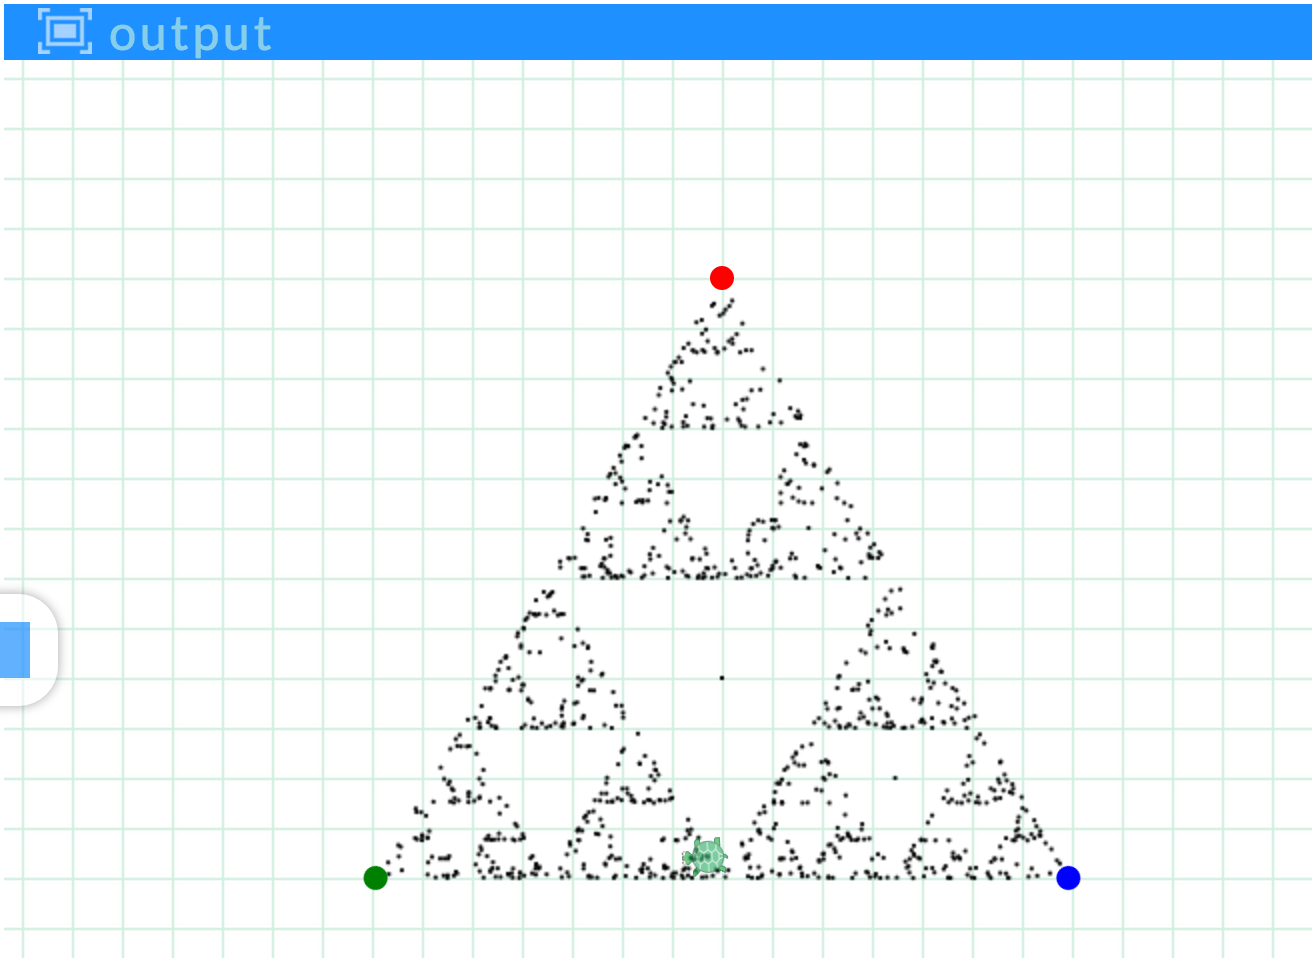 A sample output using the Pencil Code program showing a geometric pattern that the turtle has created. The turtle seems to be following the same path despite the formula being randomised